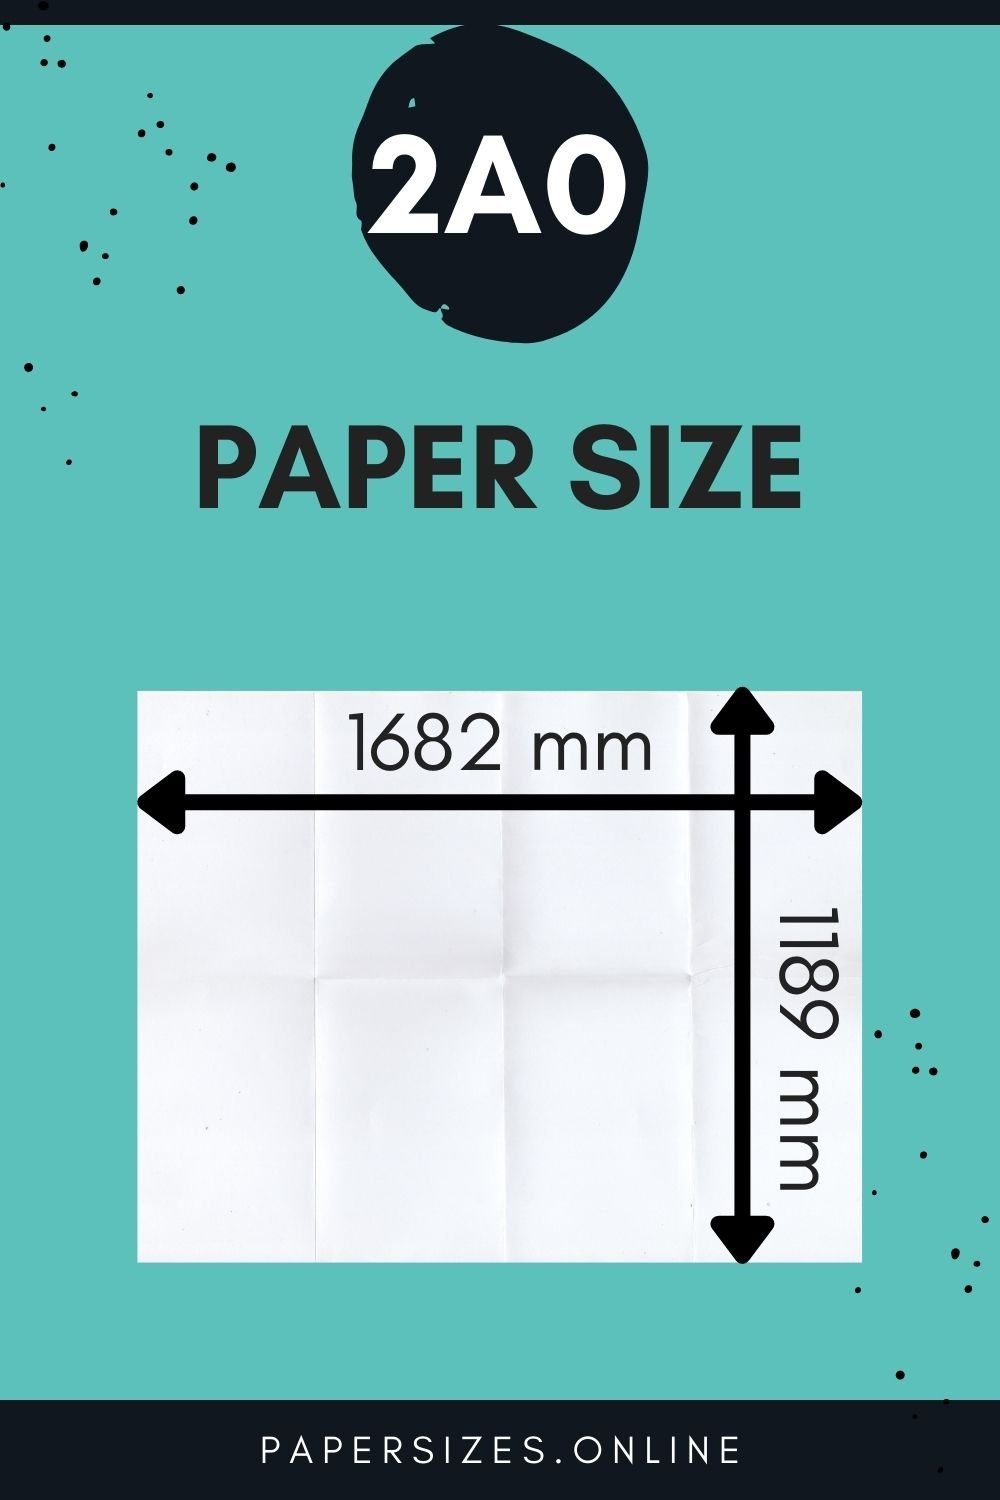 2a0-paper-size-and-dimensions-paper-sizes-online